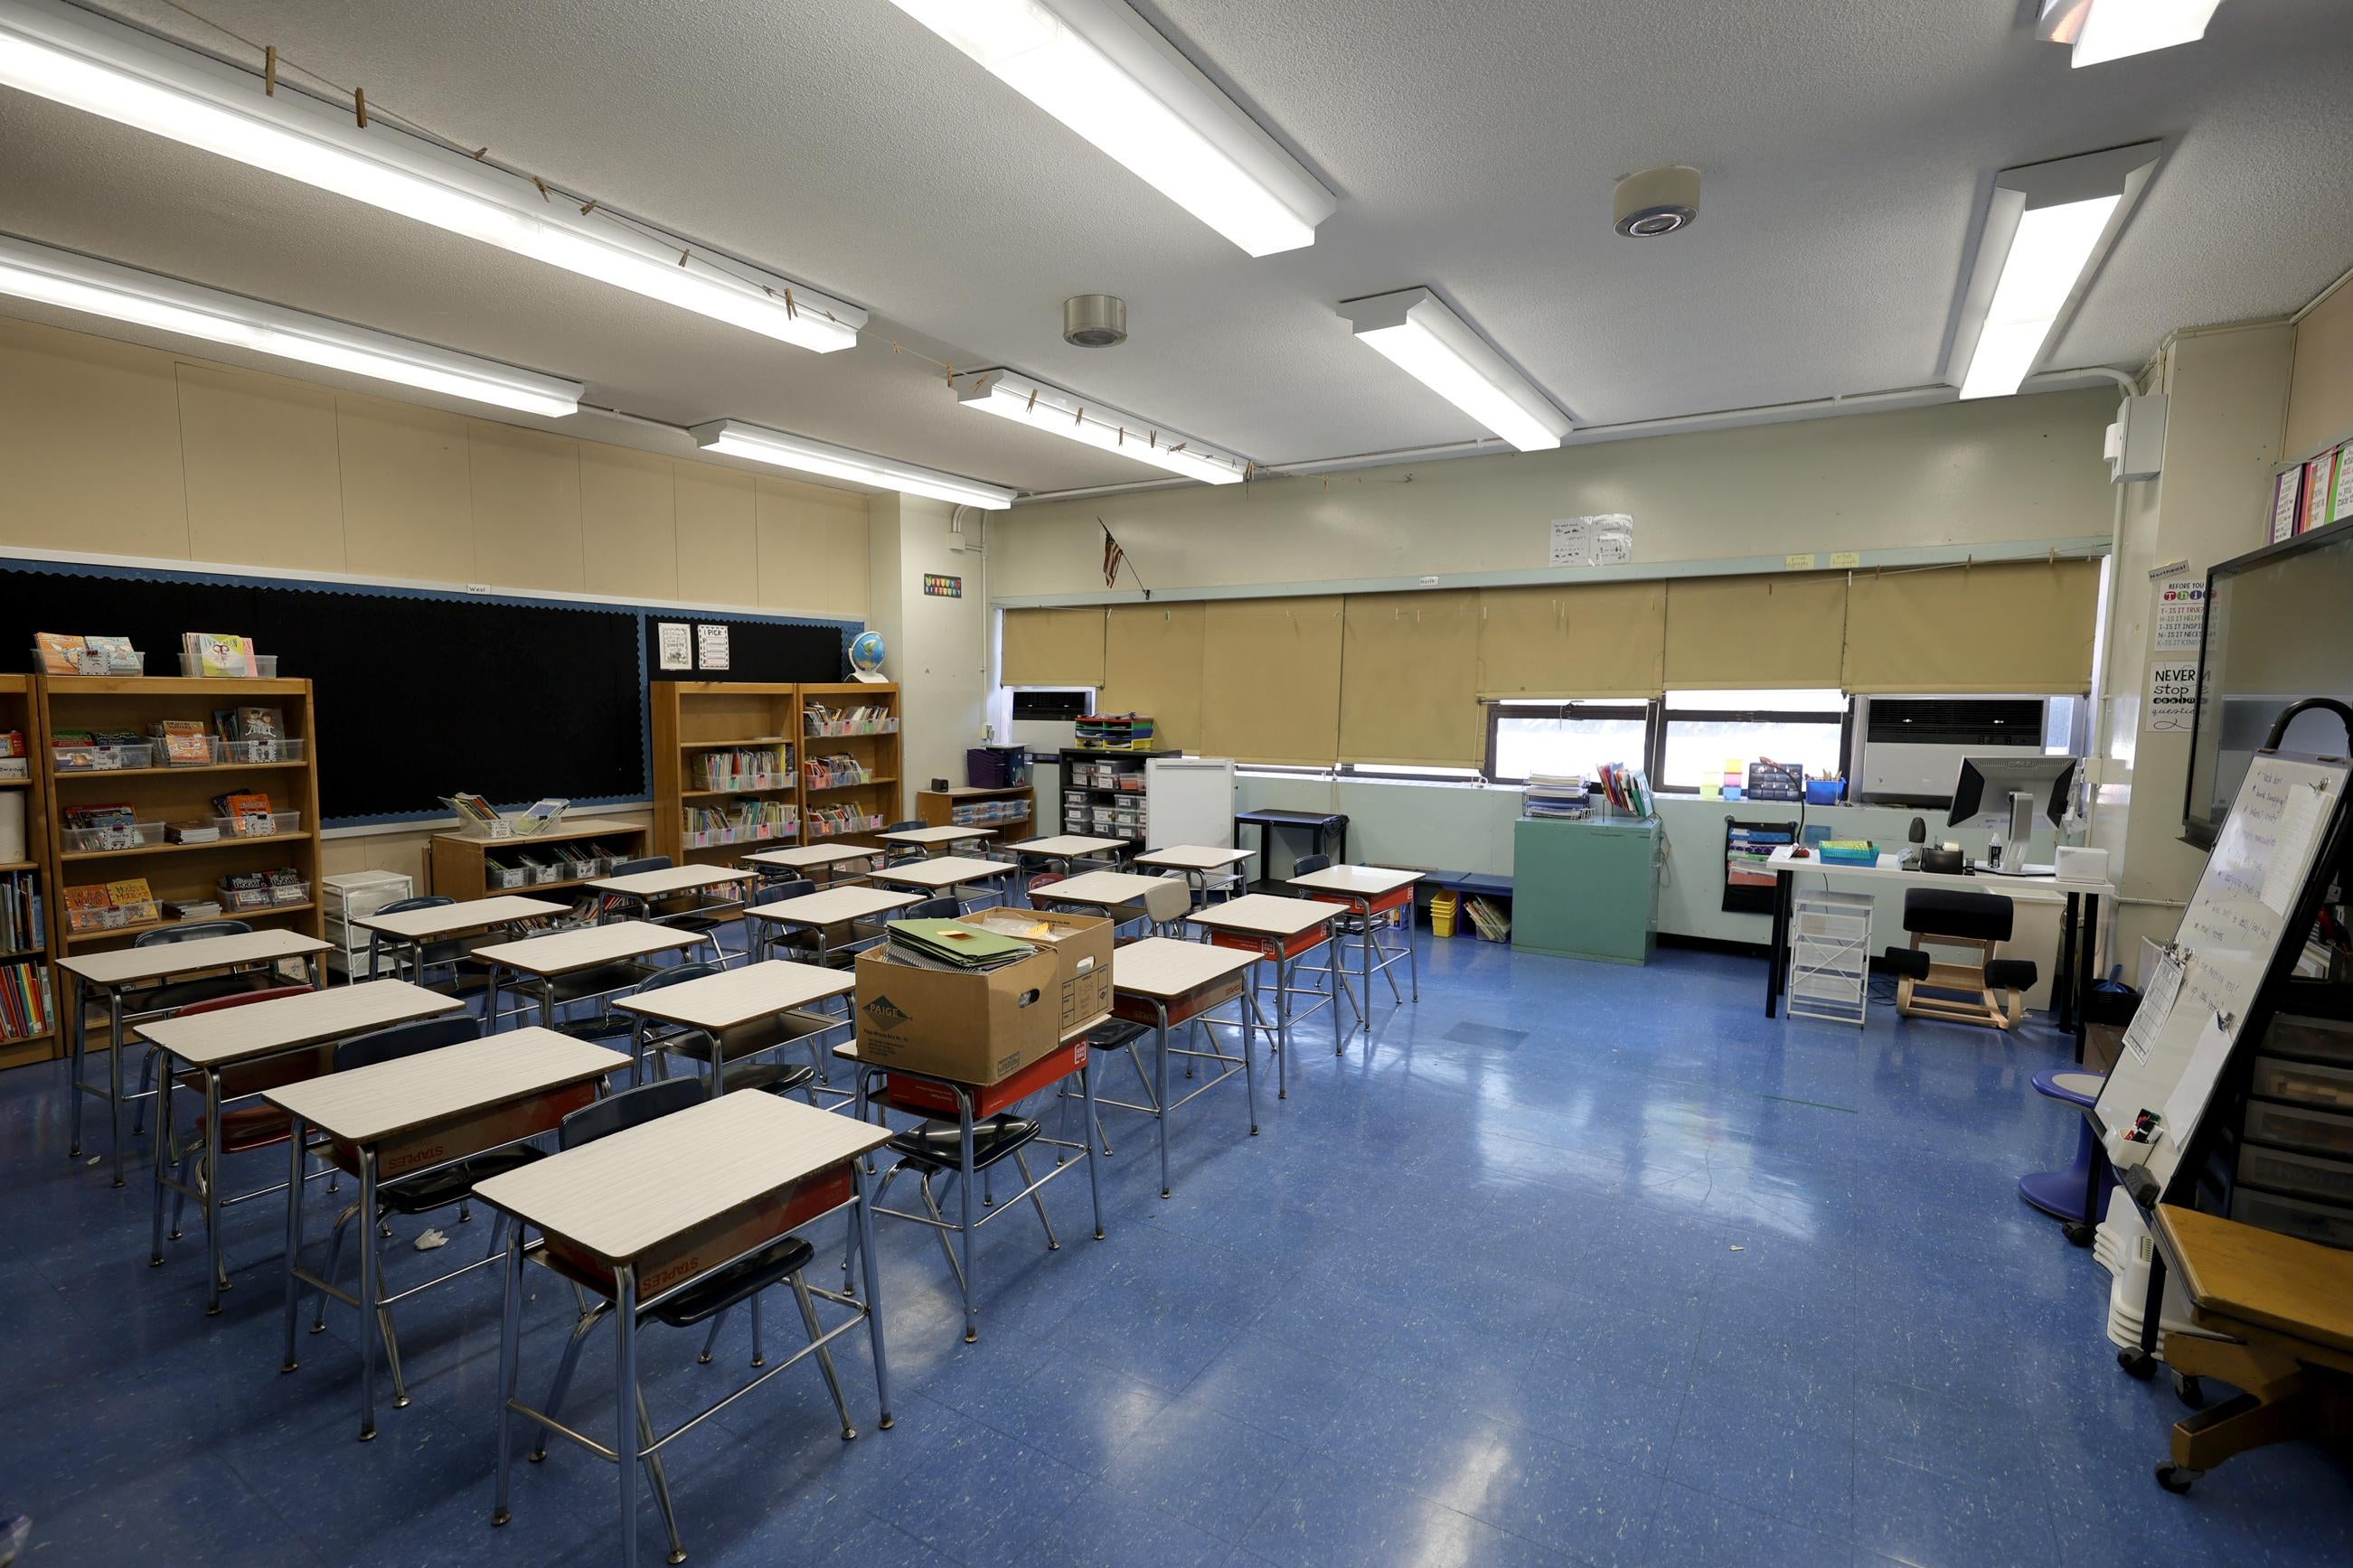 An empty classroom with desks, shelves, and a chalkboard